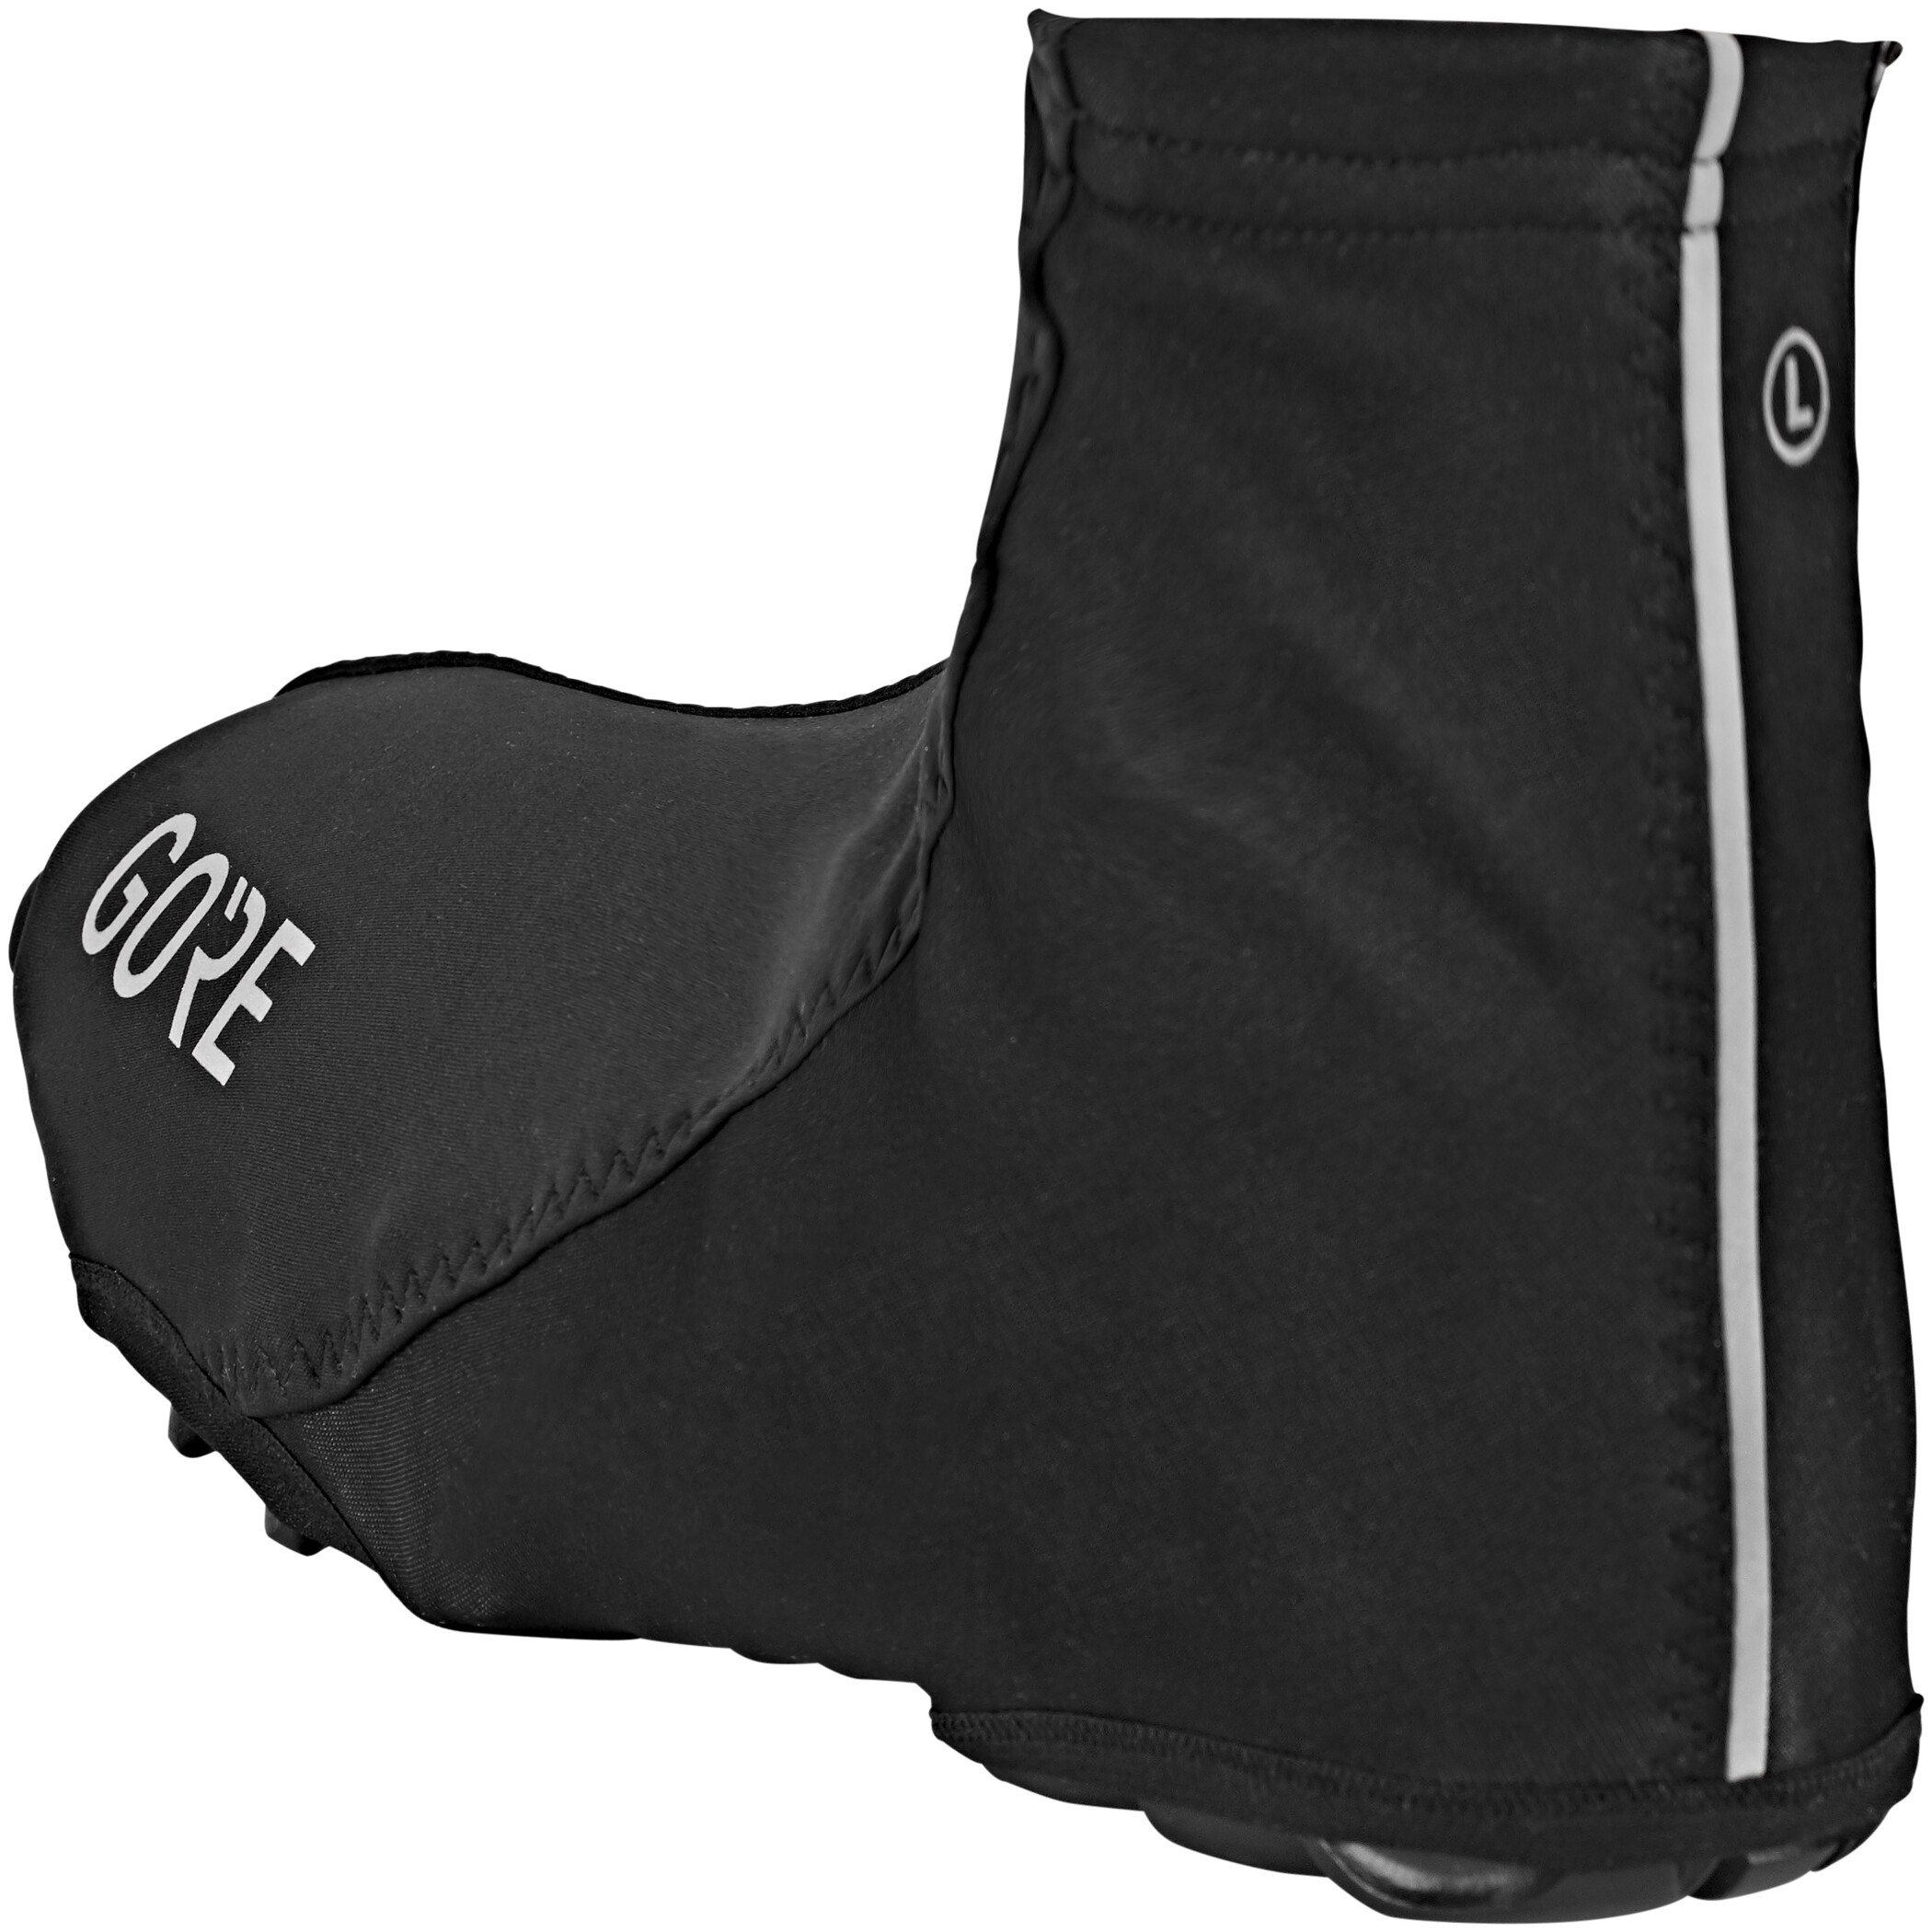 gore windstopper shoe covers